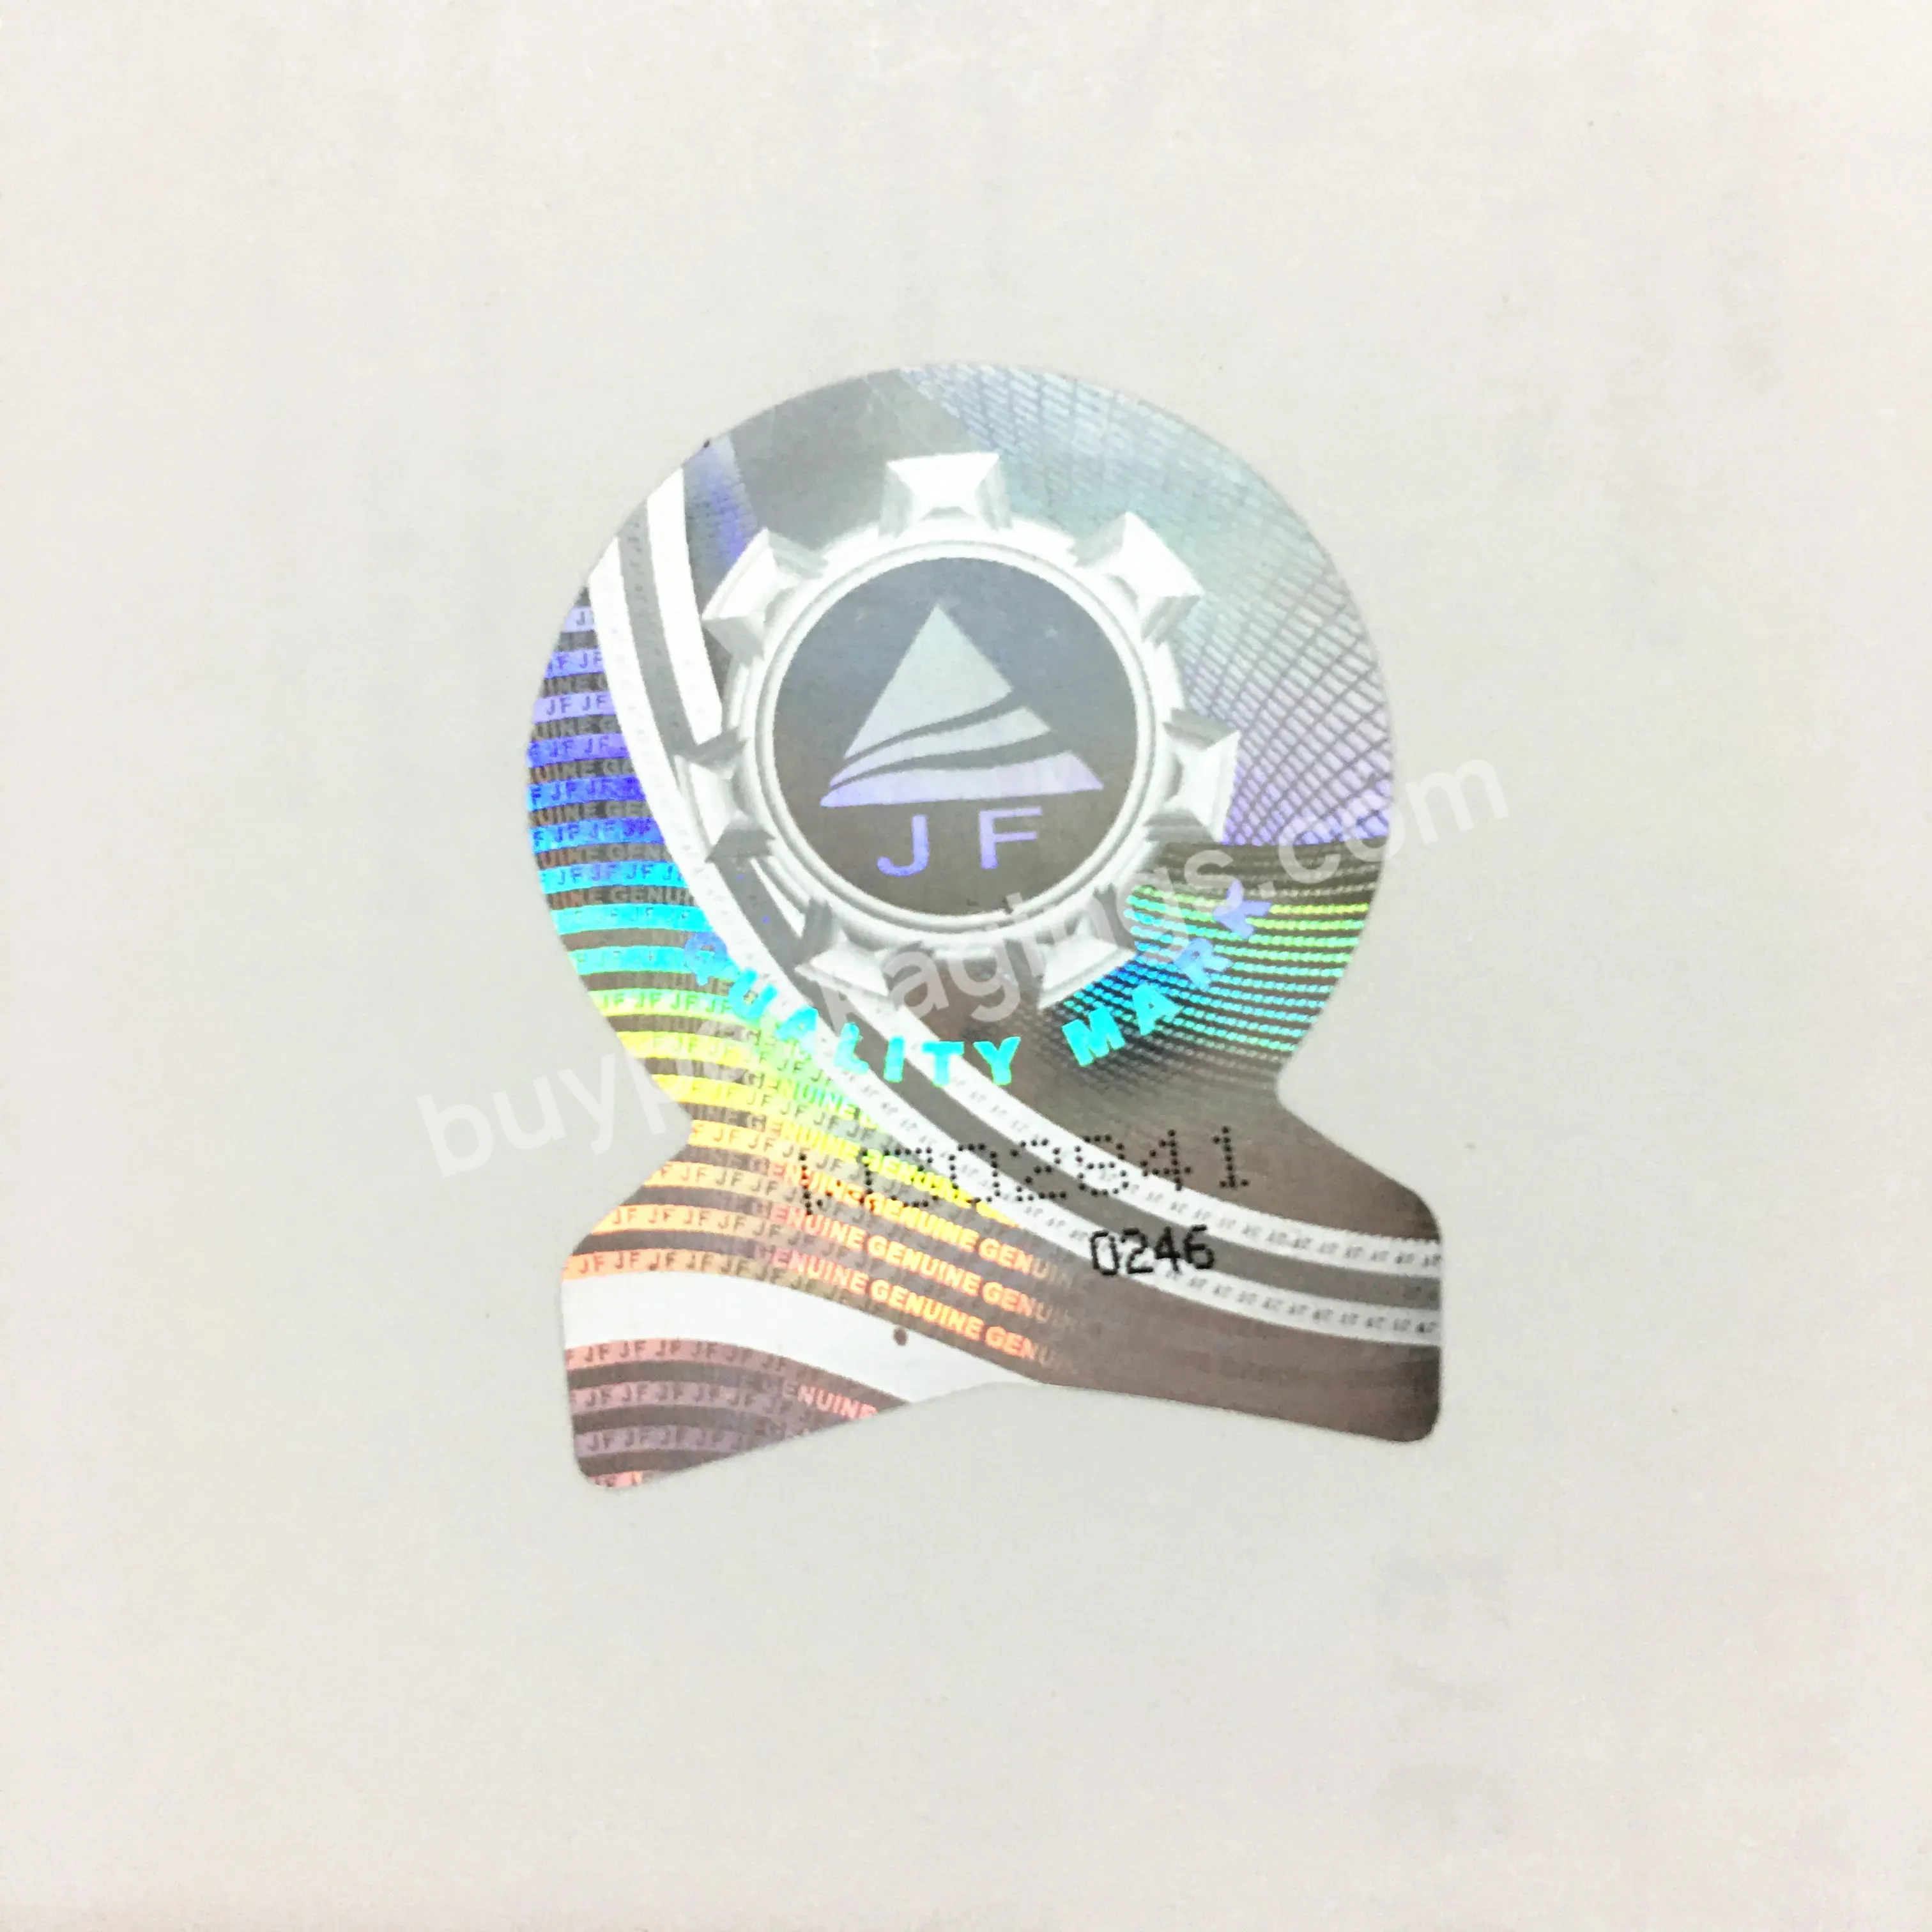 Die Cut Anti-counterfeit Custom 3d Hologram Sticker With Logo & Serial Number - Buy High Quality 3d Hologram Sticker,Printable Hologram Sticker,3d Hologram Sticker With Logo & Serial Number.